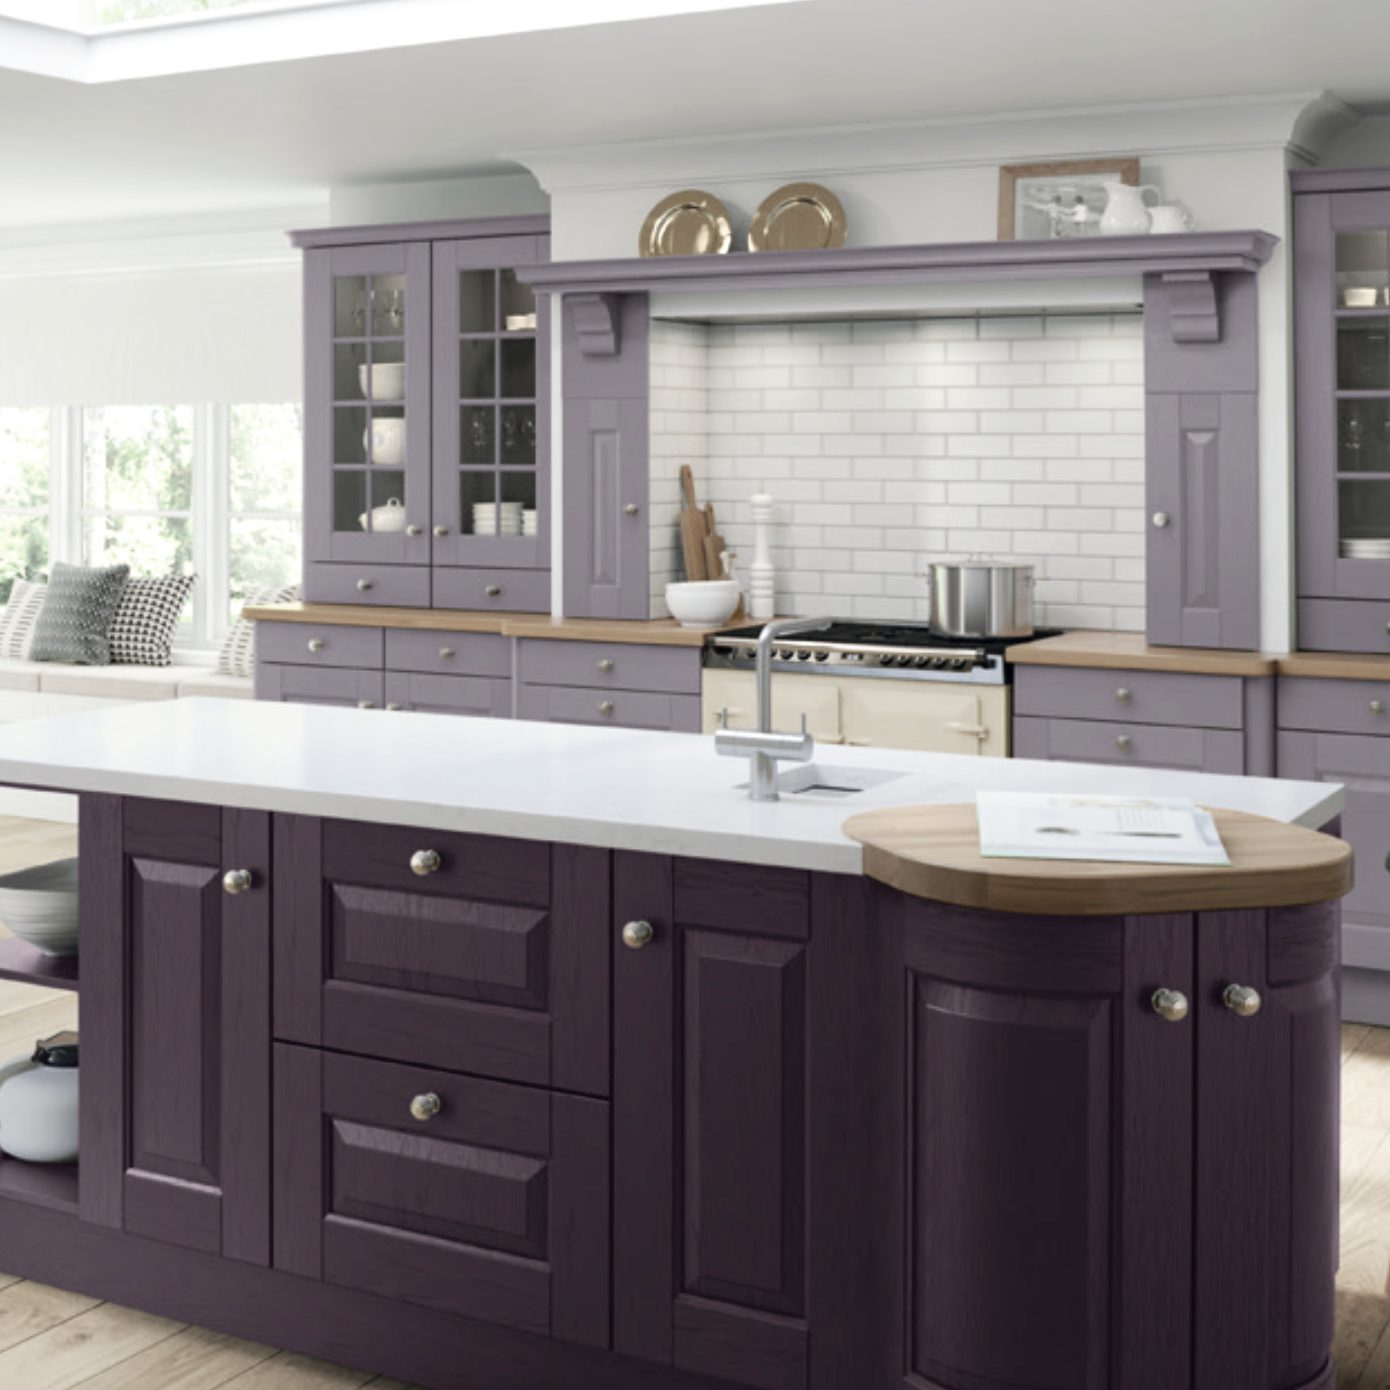 Painted shaker kitchen in aubergine and muted lavender